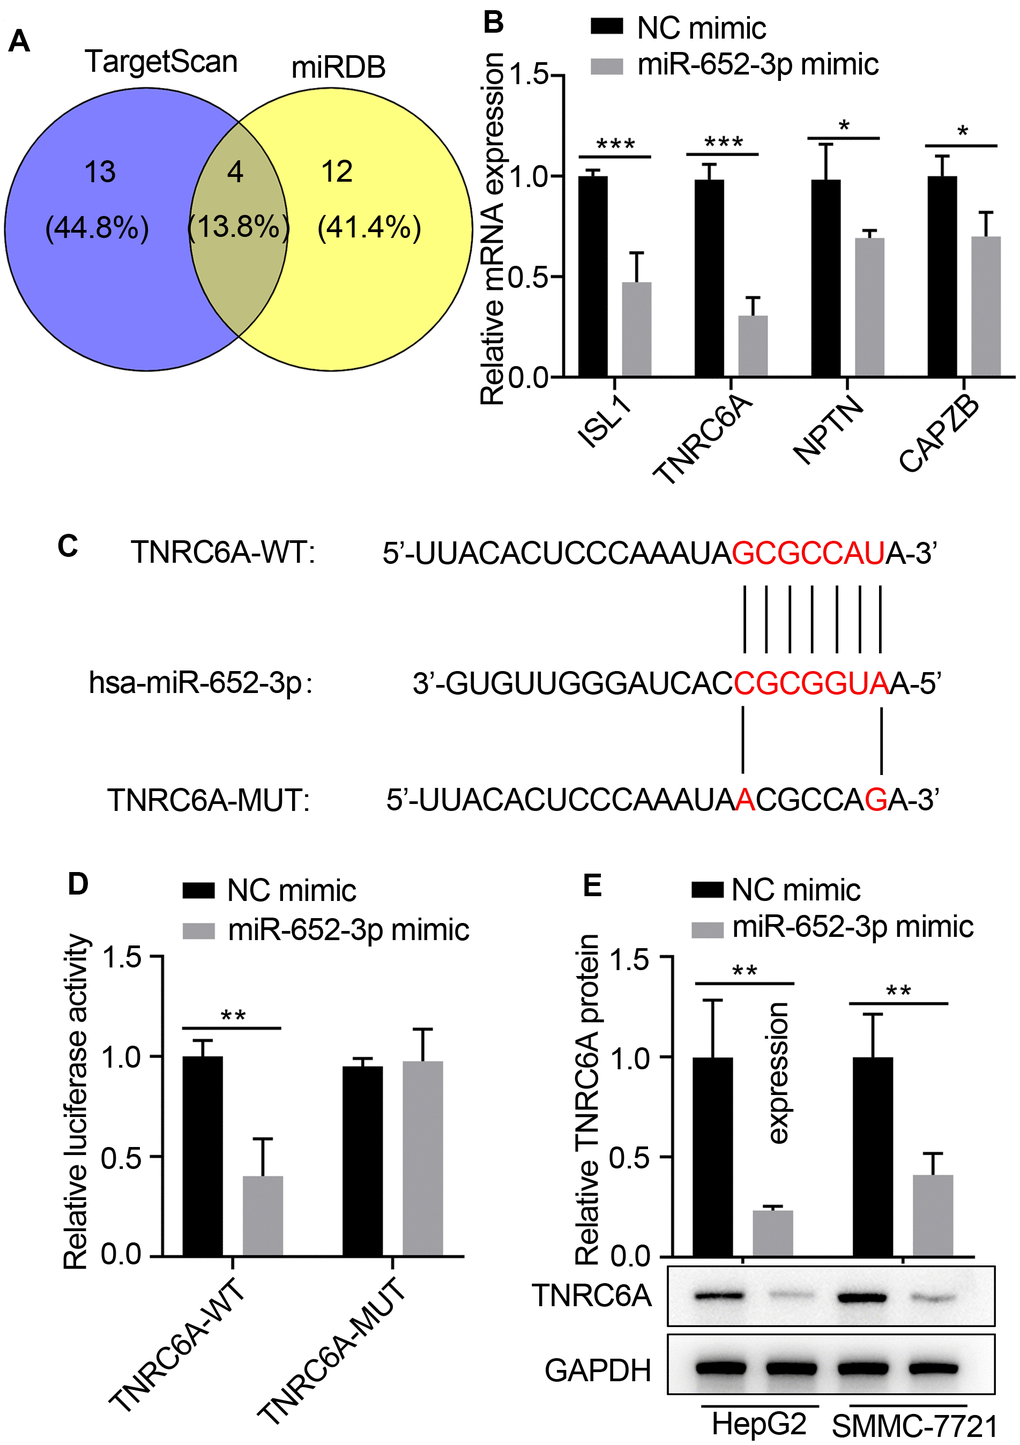 TNRC6A is a direct target of miR-652-3p in human HCC cells. (A) The underlying targets of miR-652-3p were predicted using TargetScan and miRDB databases. (B) Expression of target genes in HepG2 cells determined by qRT-PCR after transfecting with miR-652-3p mimic. (C) Scheme and sequence of the intact miR-652-3p, TNRC6A (Wt) and its mutant (Mut). Computer prediction of miR-652-3p binding sites in the 3’UTR of human TNRC6A gene. (D) SMMC-7721 cells were co-transfected with miR-652-3p and WT or MUT 3’UTR of TNRC6A. Data were presented as the mean ± SD, and analyzed with Student’s t-test. ** E) Protein level of TNRC6A was detected by WB in HepG2 and SMMC-7721 cells transfected with NC mimic and miR-652-3p. GAPDH was also detected as a loading control. Data were presented as the mean ± SD, and analyzed with Student’s t-test; ** P 